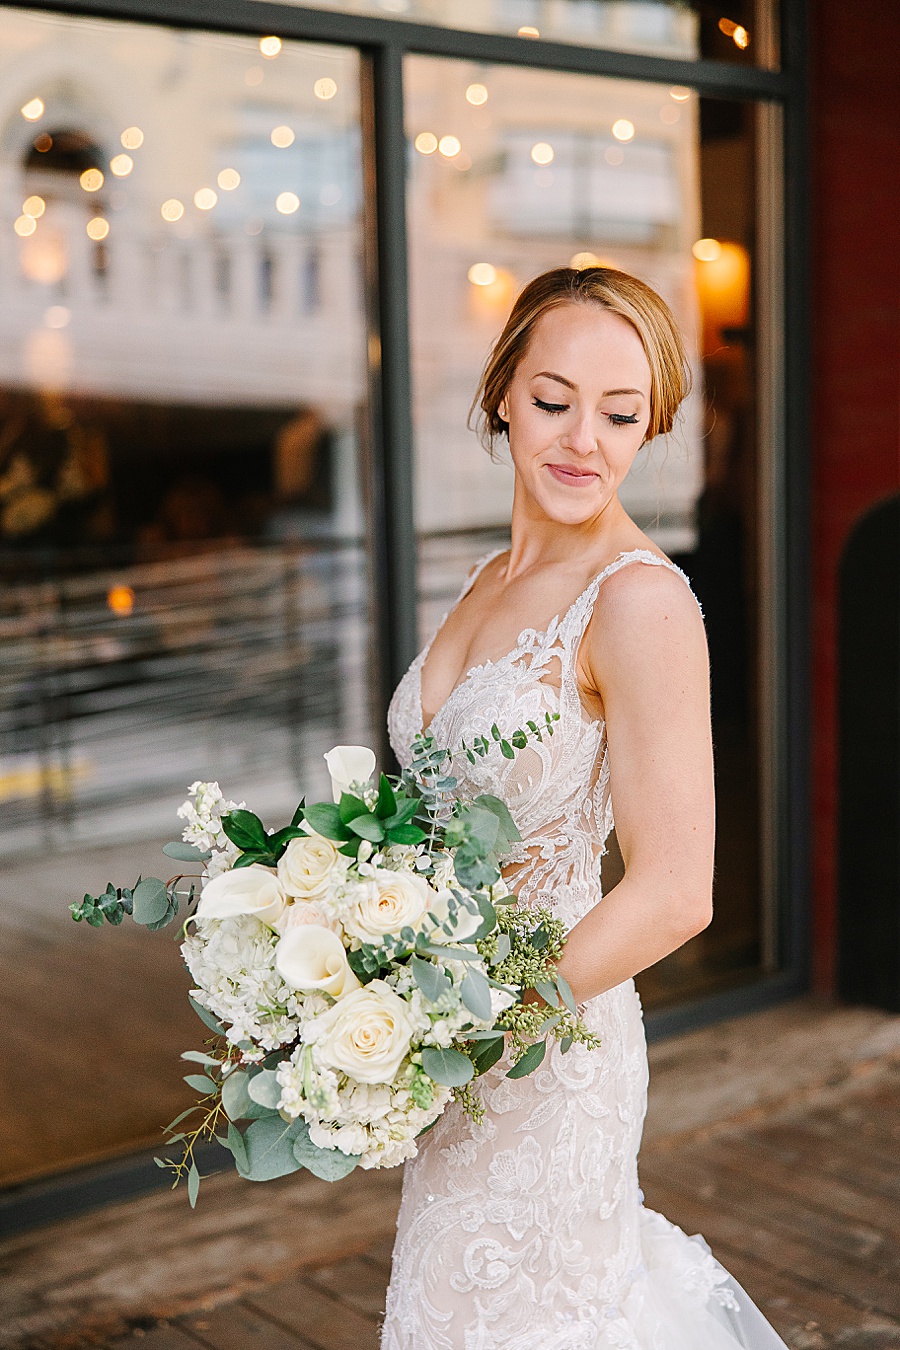 Bridal portrait at Jackson Terminal events wedding in Knoxville TN by Mandy Hart Photo, Knoxville TN Wedding Photographer